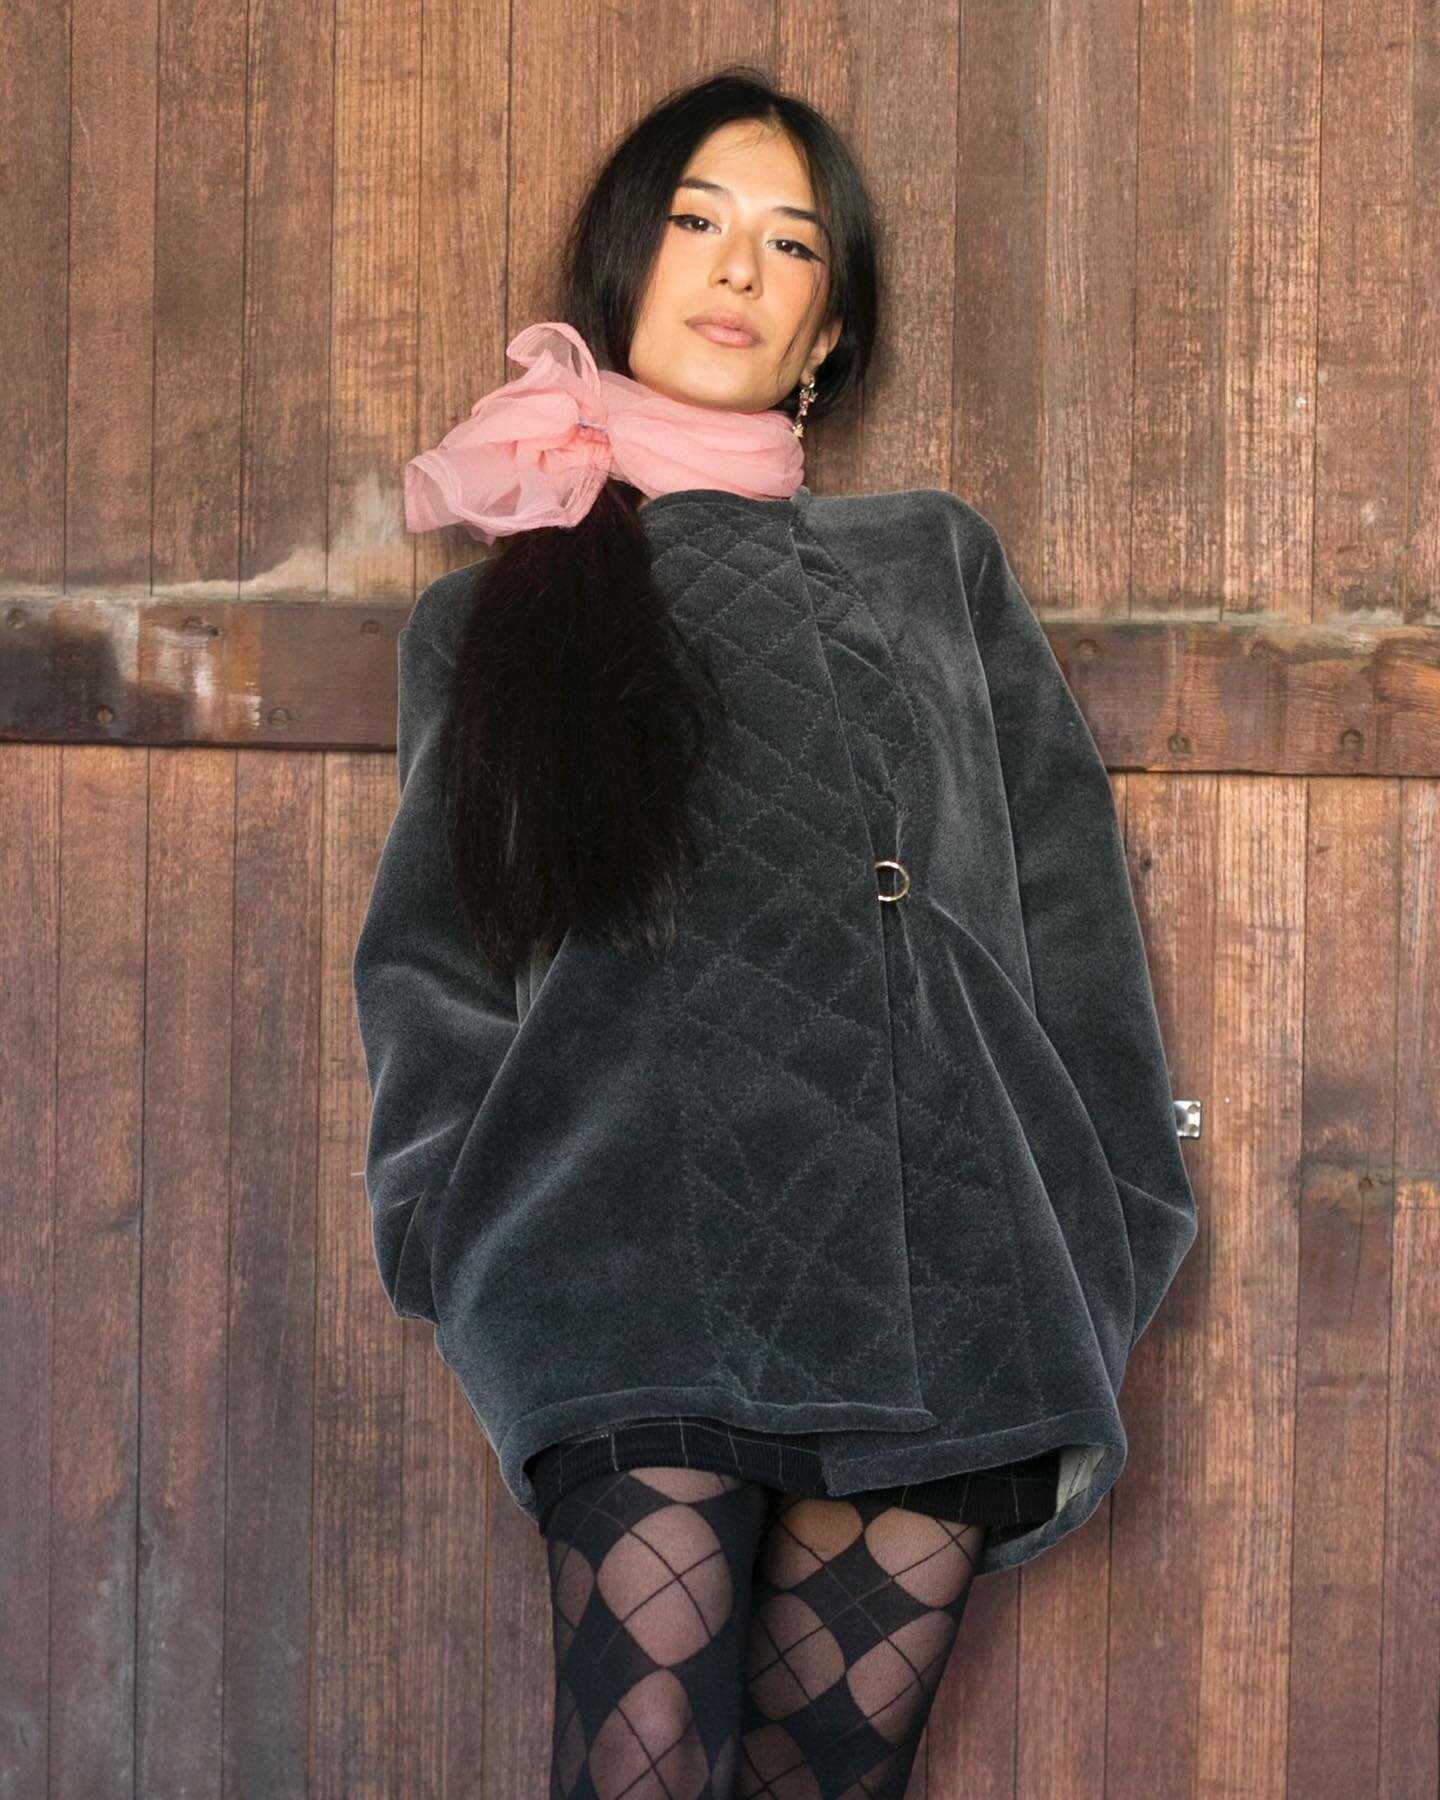 ⚔️🌸Fontain Coat🌸⚔️

🌸Deadstock Flocked Neoprene with Quilting Detail~ Courtesy of @luk.asmary 🥂

🌸Now for Sale @thecanvasbyq.bowery 

🌸Modeled by Fabulous @elitheghostgirl 

🌸Image by @mairimccormickphoto